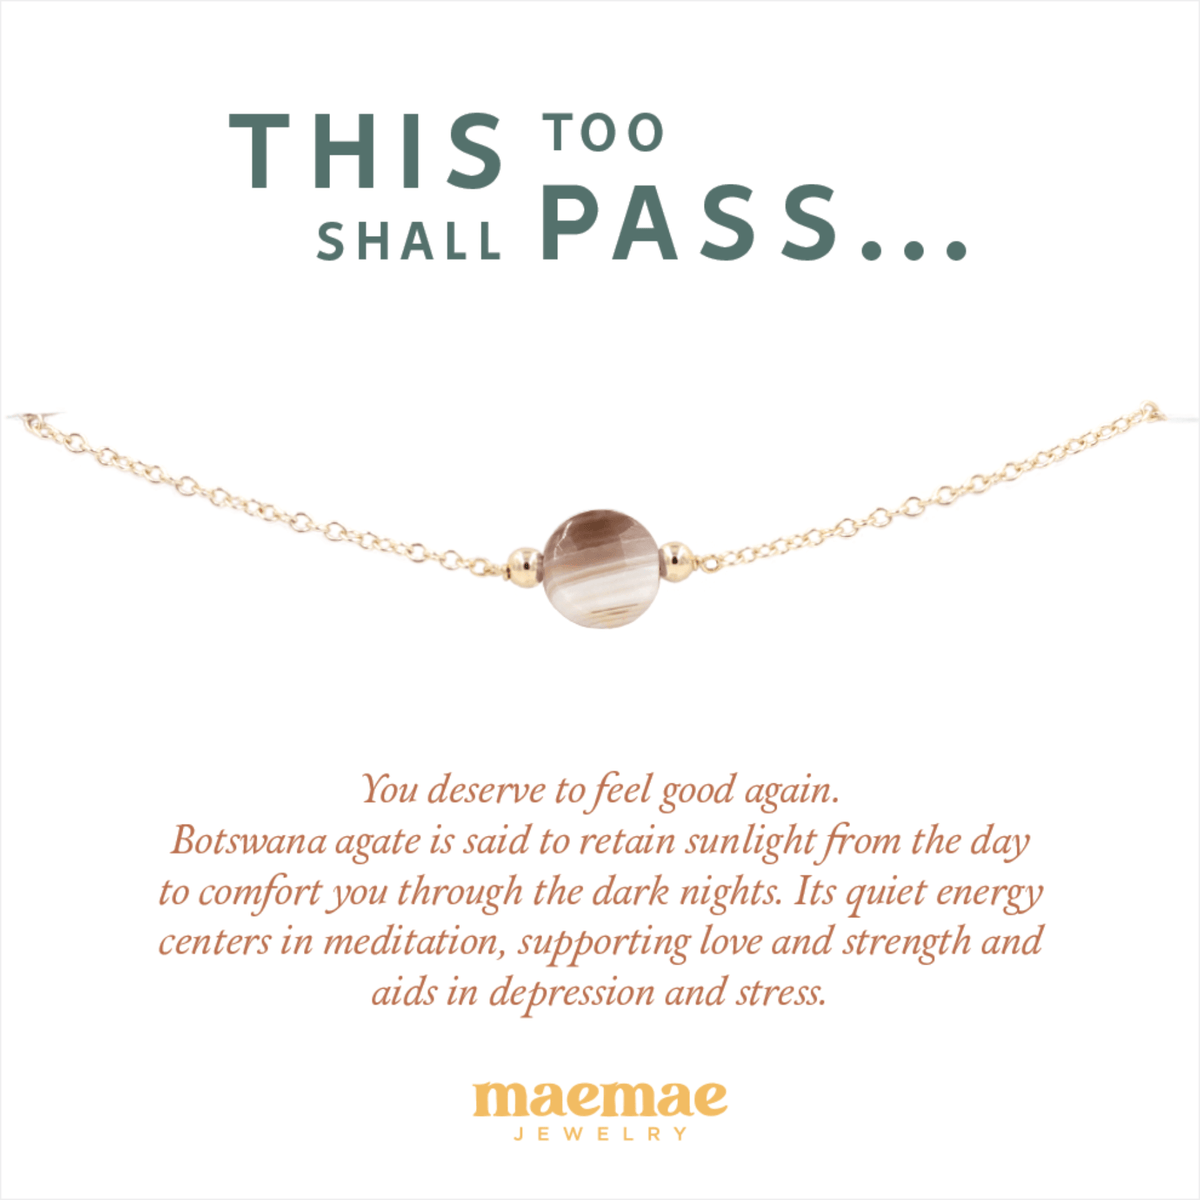 MaeMae Jewelry This Too Shall Pass botswana agate stone gold filled bracelet on affirmation card